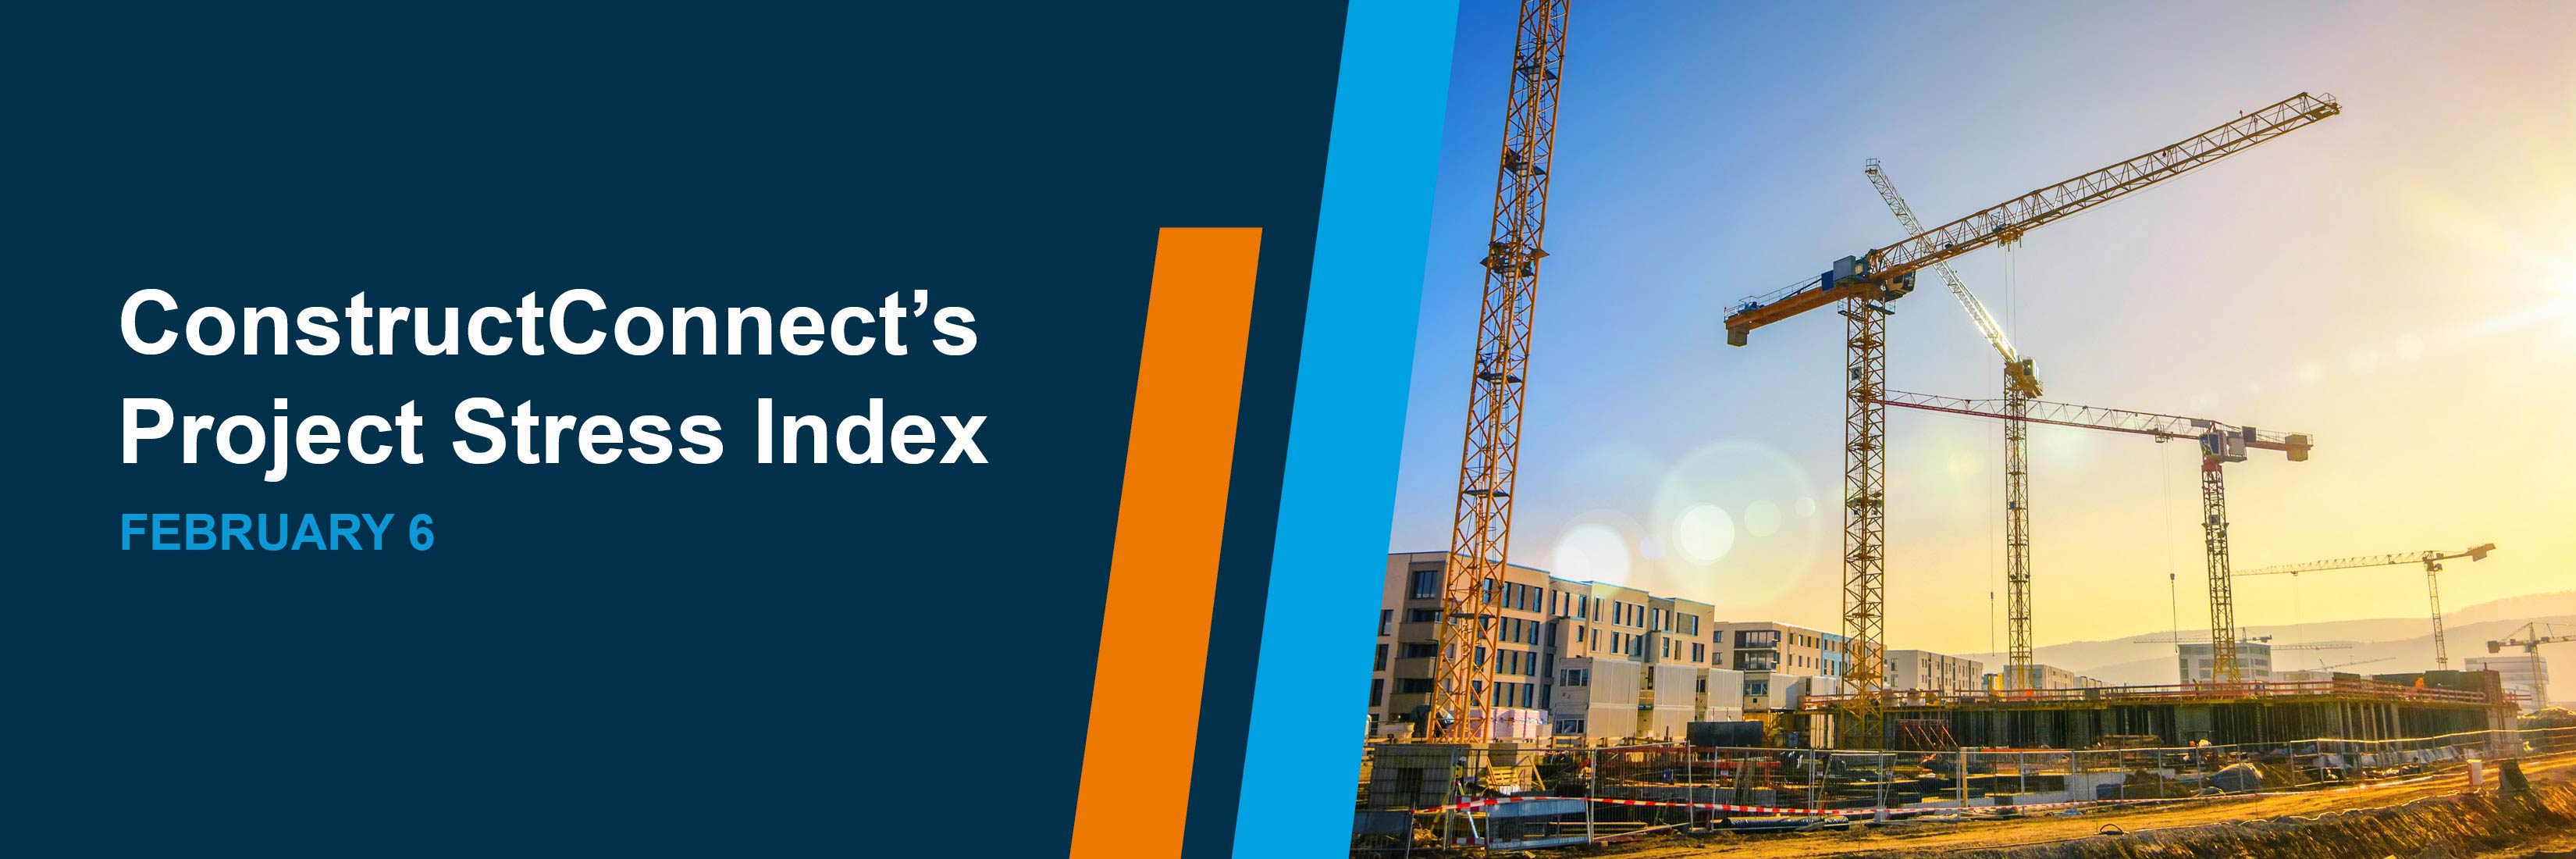 ConstructConnect's Project Stress Index - February 6